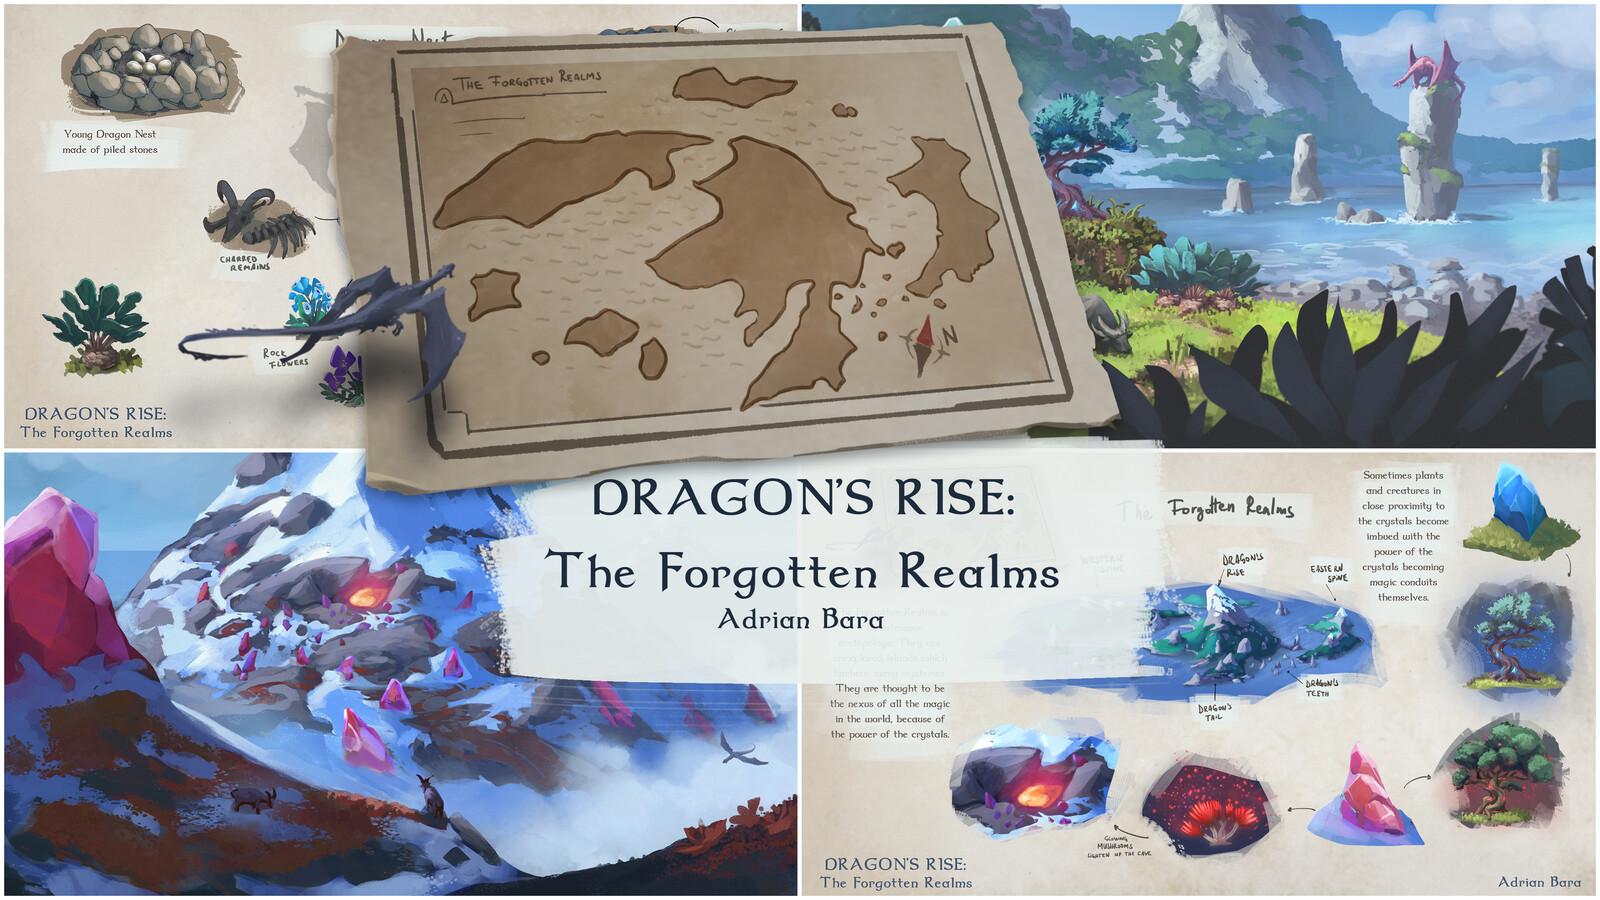 "Dragon's Rise - The Forgotten Realms" challenge entry